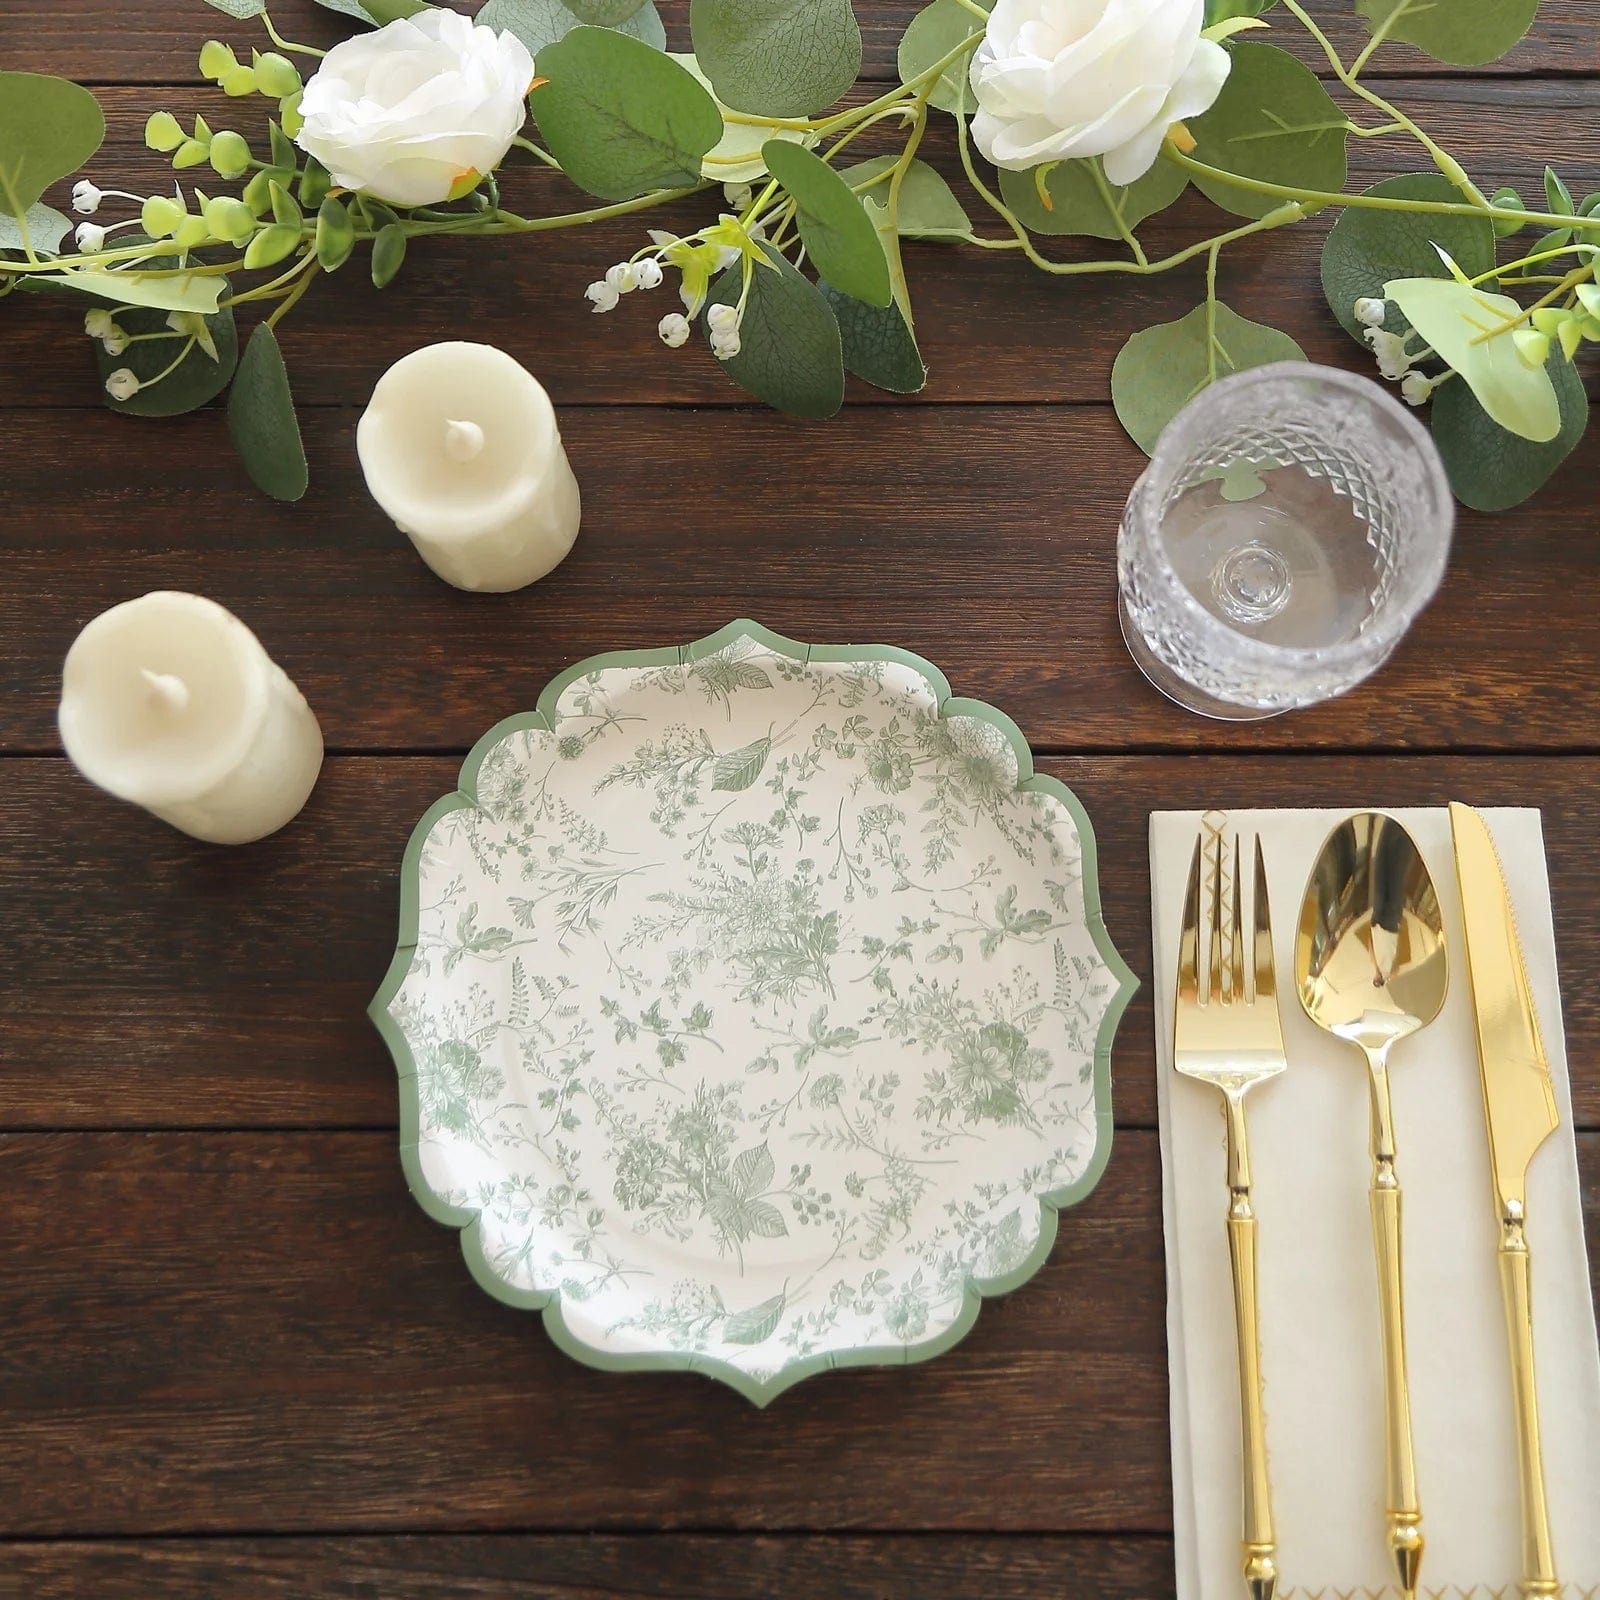 25 White Disposable Paper Plates with Sage Green Floral Leaves Print and Scalloped Rim